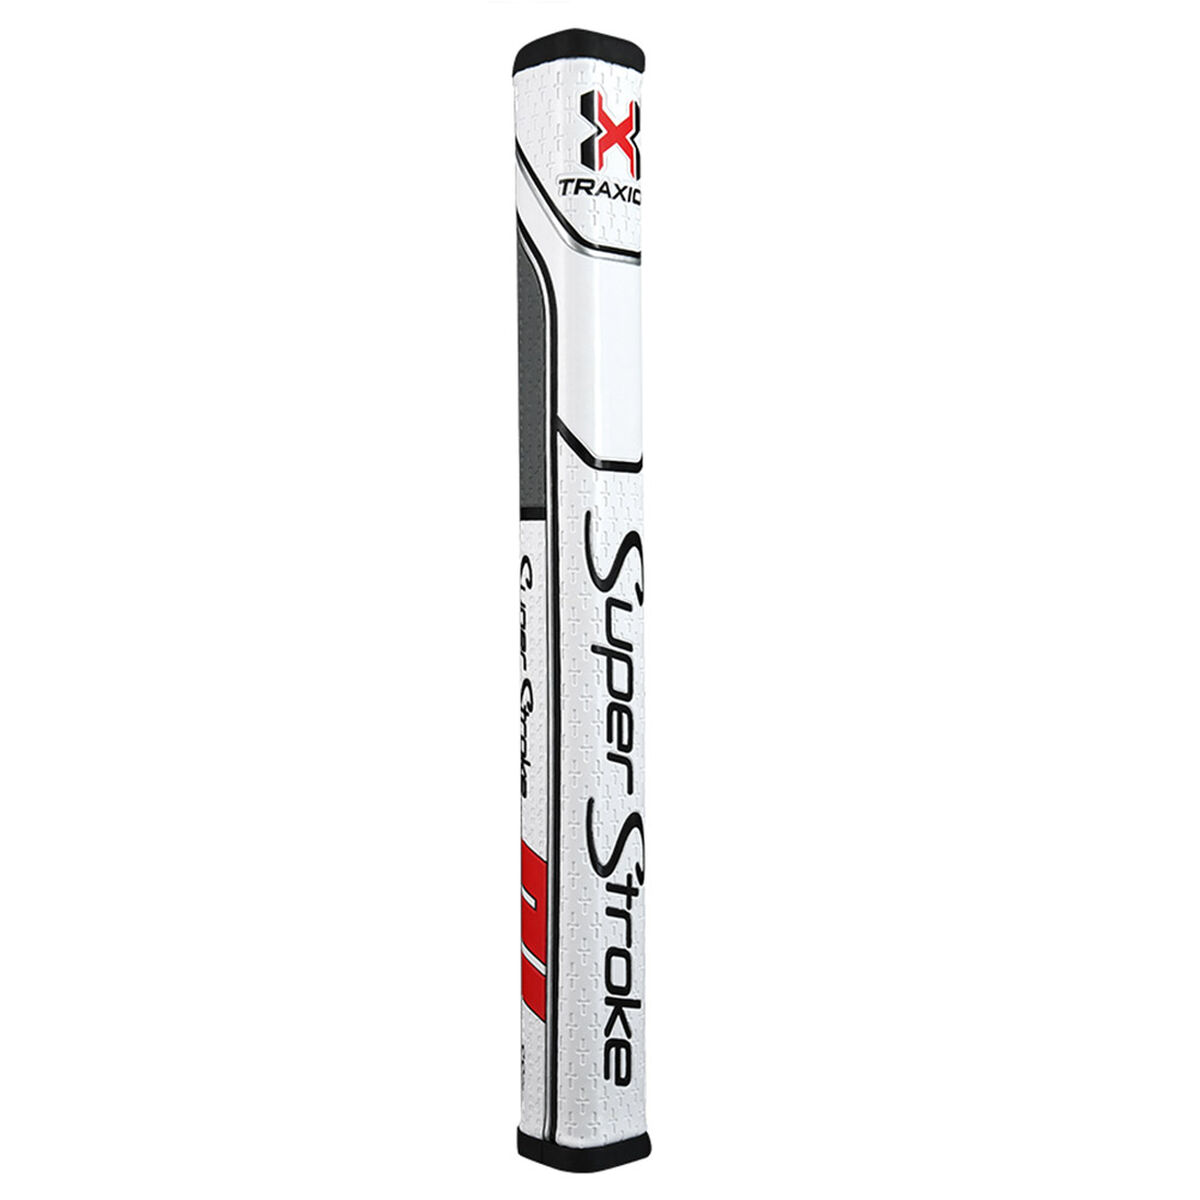 Poignée de Golf Putter SuperStroke Traxion SS2R Squared, homme, White/red/grey | Online Golf